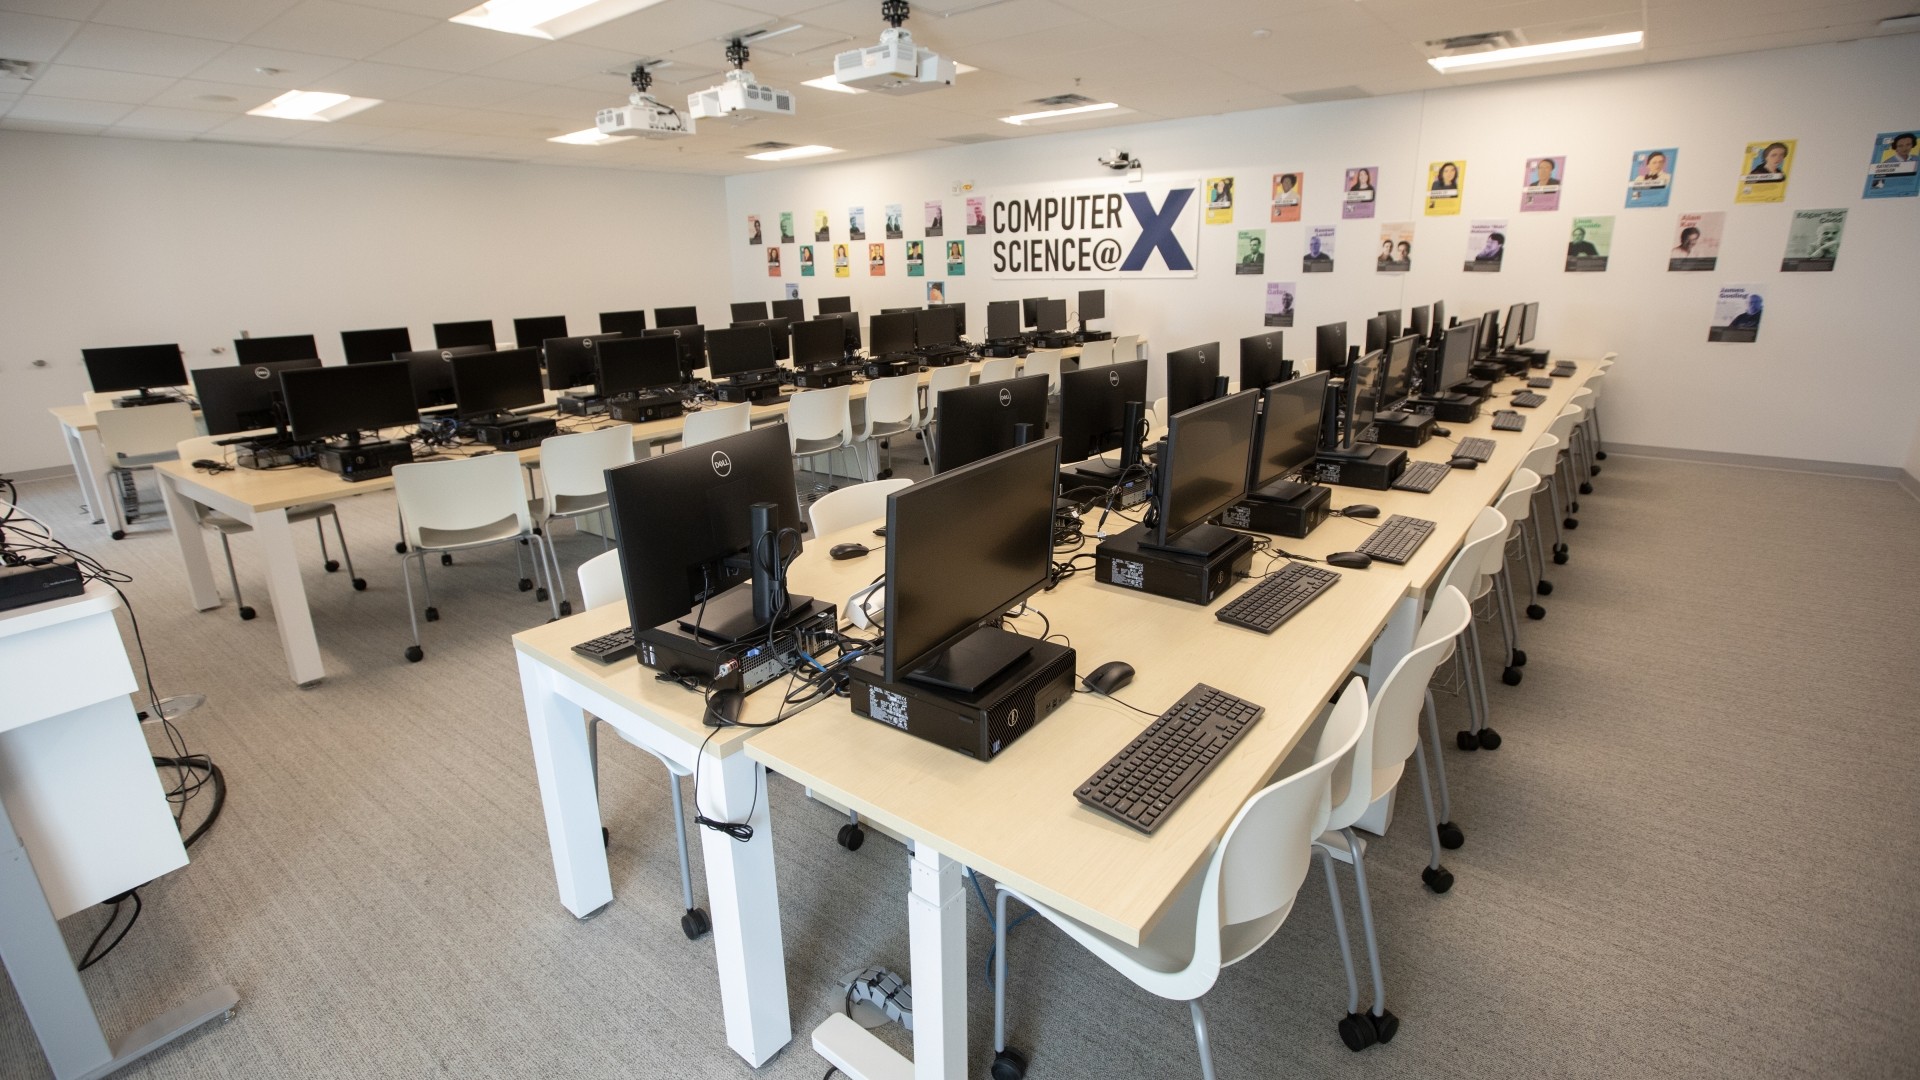 A computer science lab with desks and computers